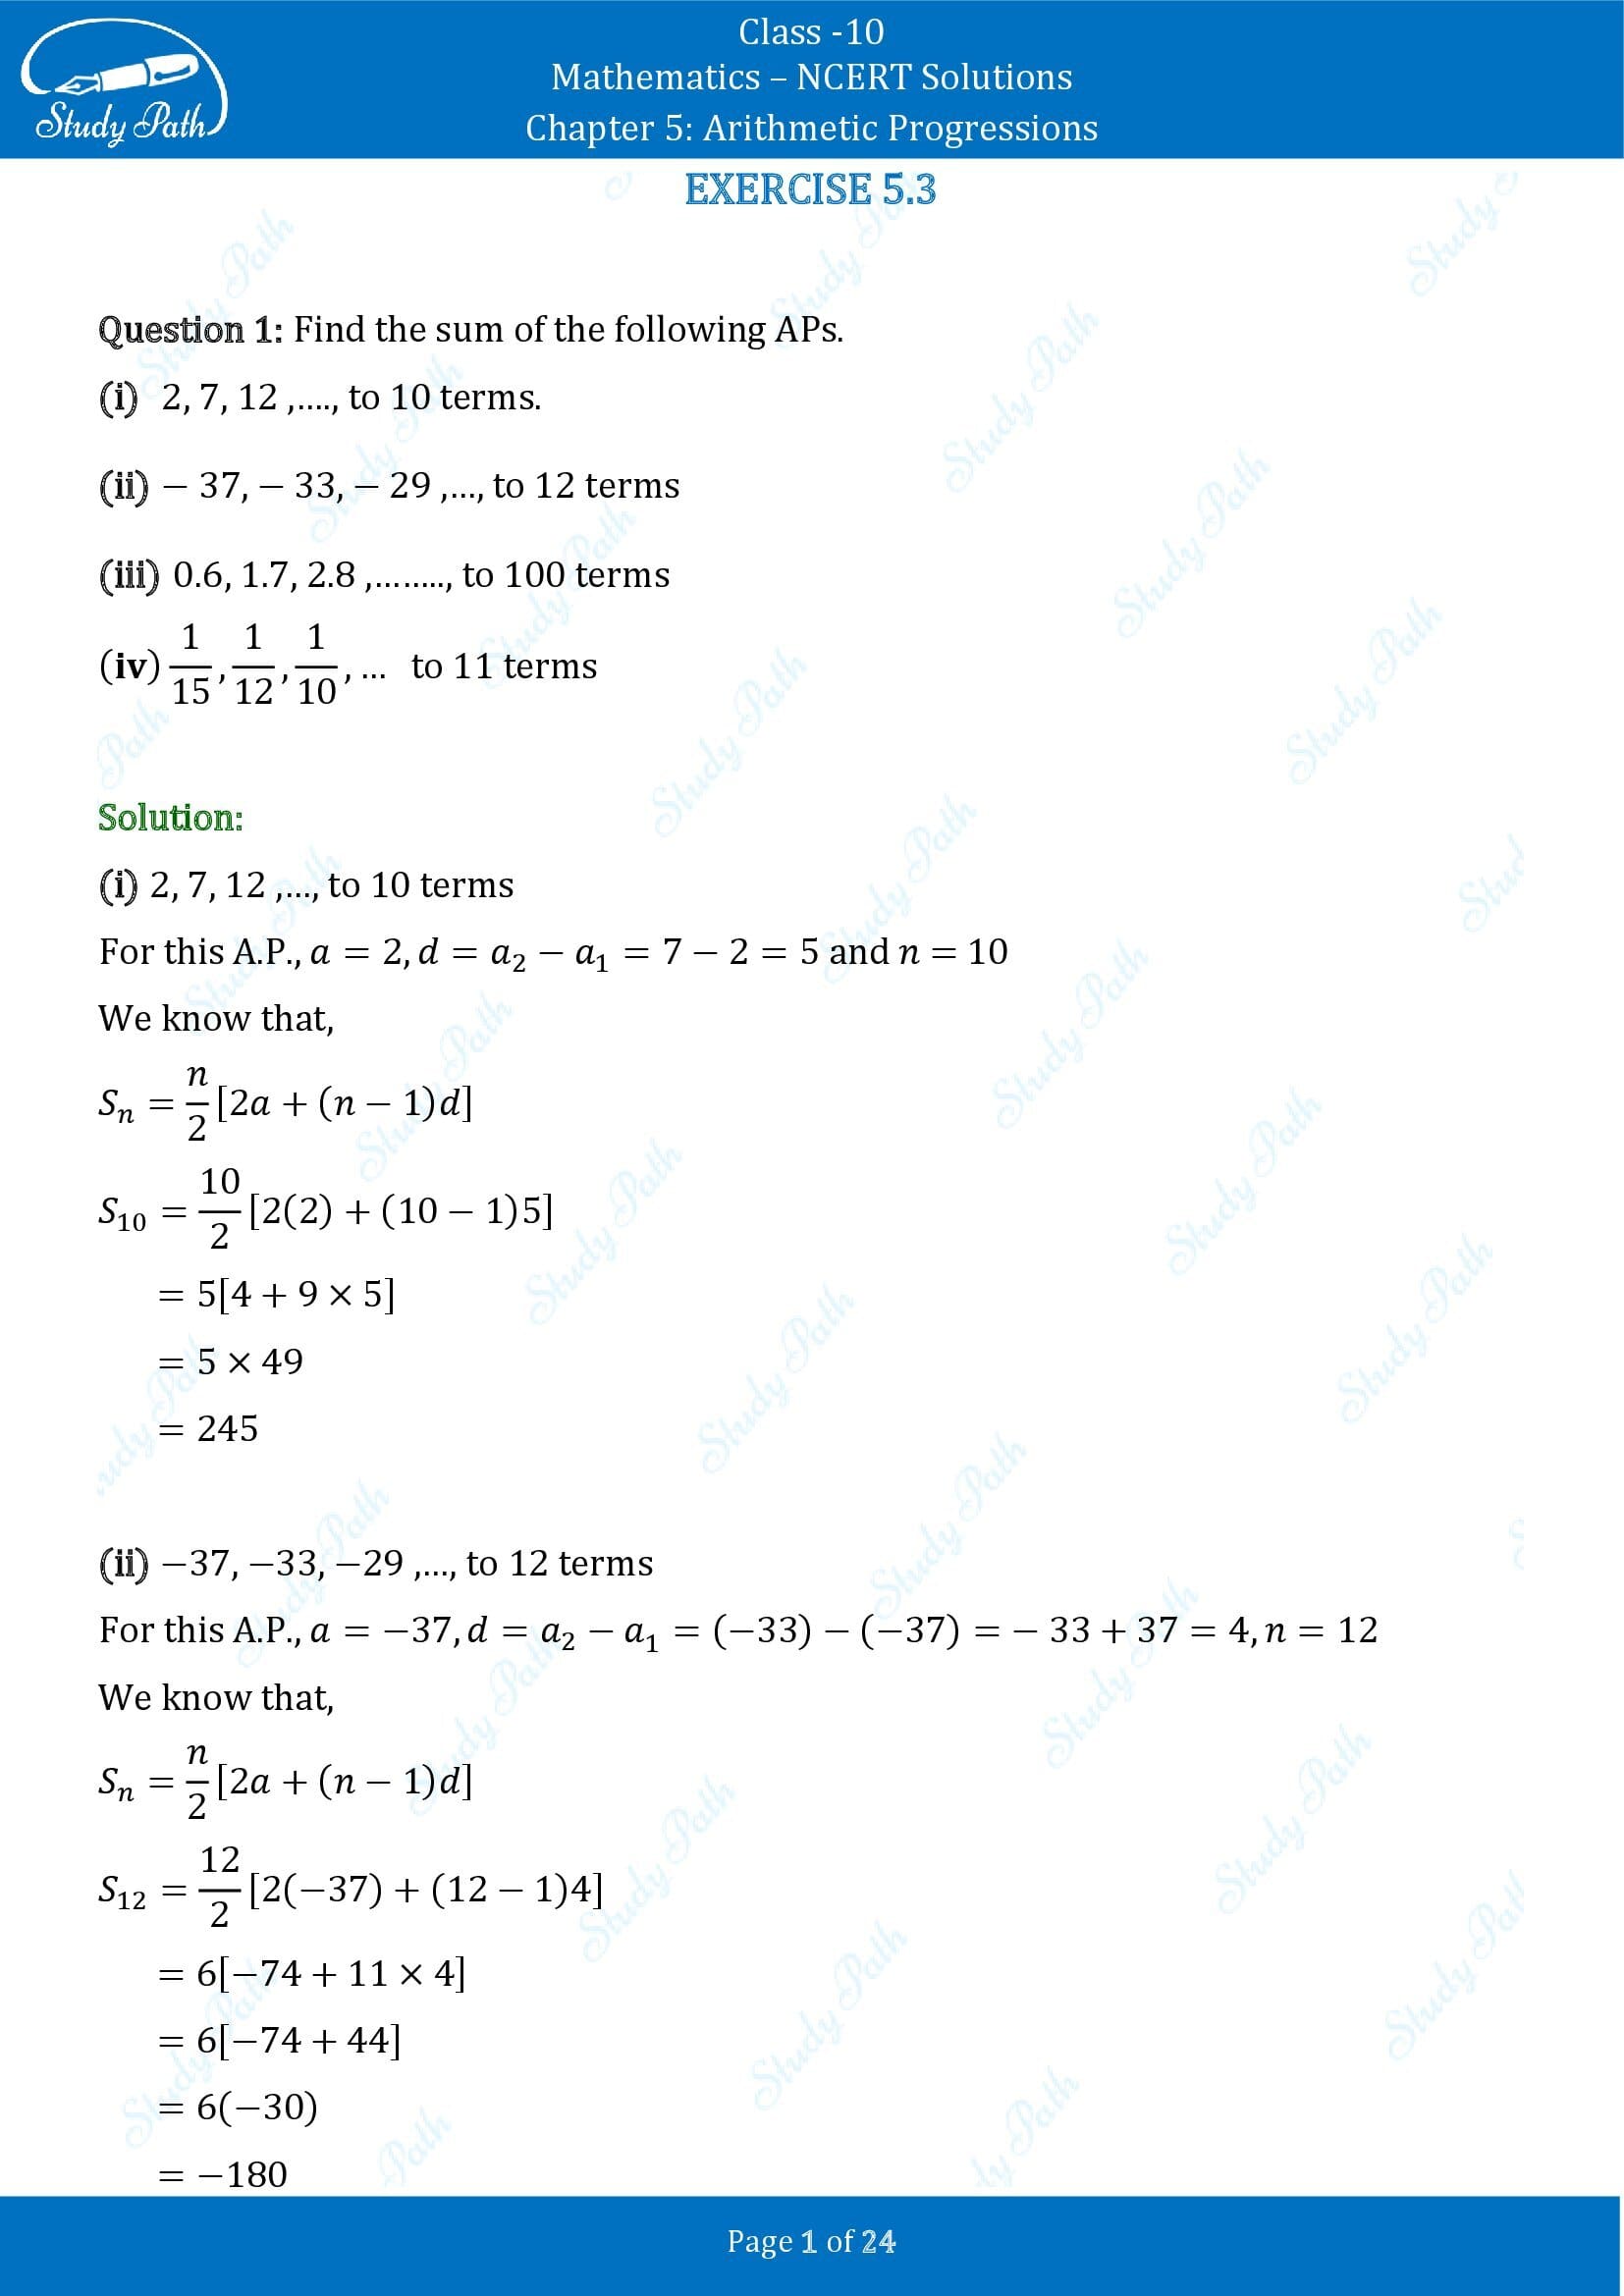 NCERT Solutions for Class 10 Maths Chapter 5 Arithmetic Progressions Exercise 5.3 00001